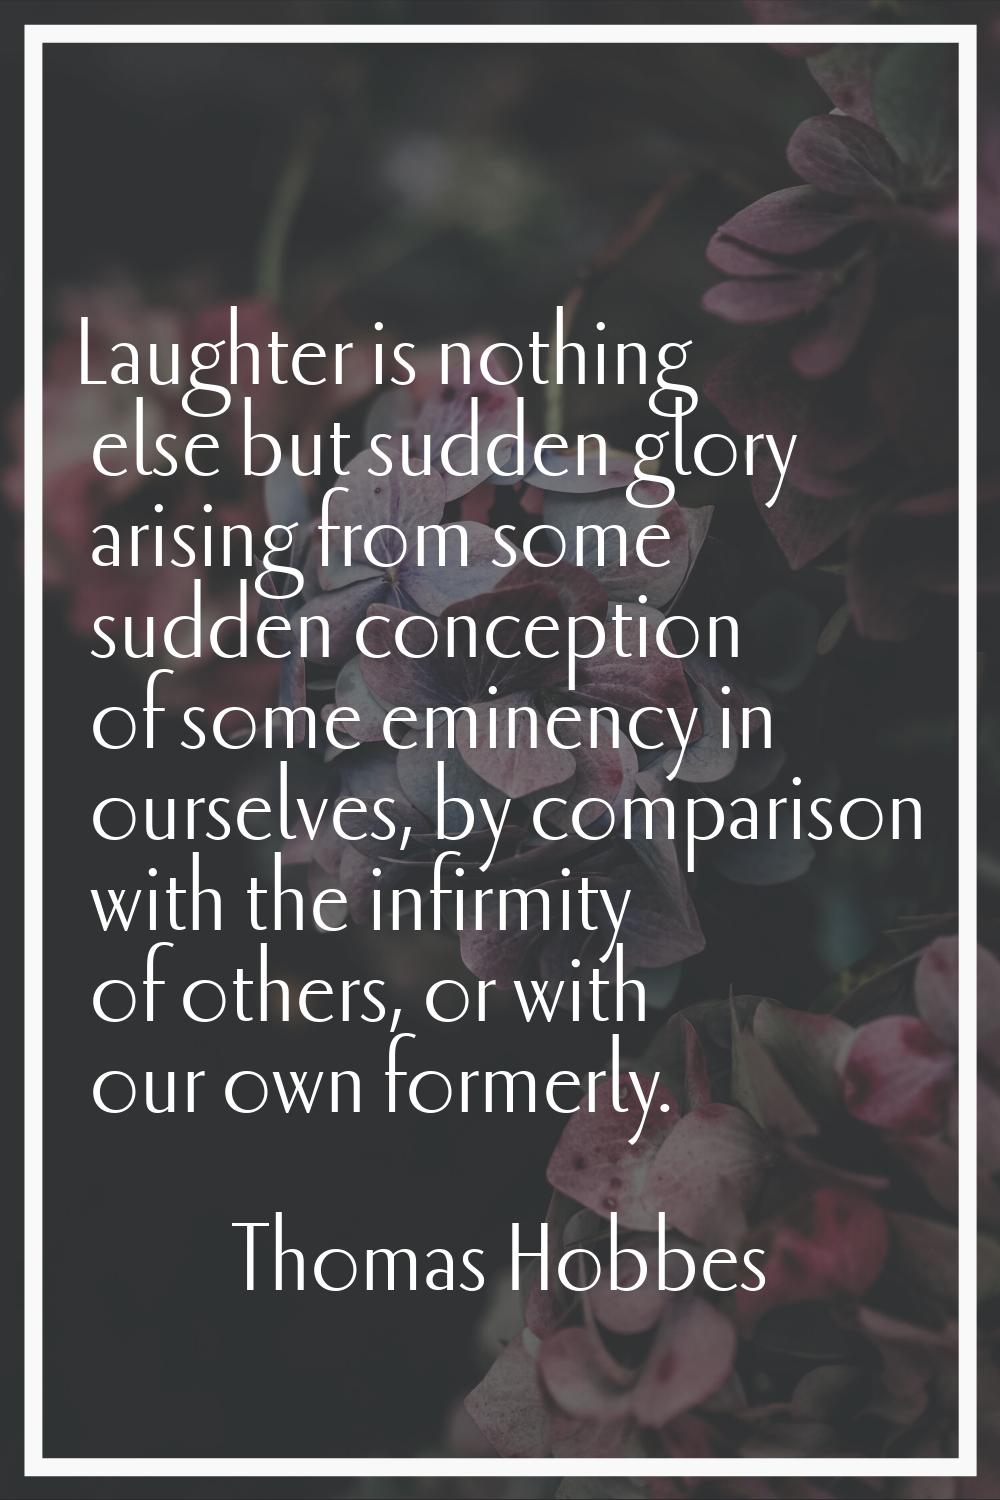 Laughter is nothing else but sudden glory arising from some sudden conception of some eminency in o